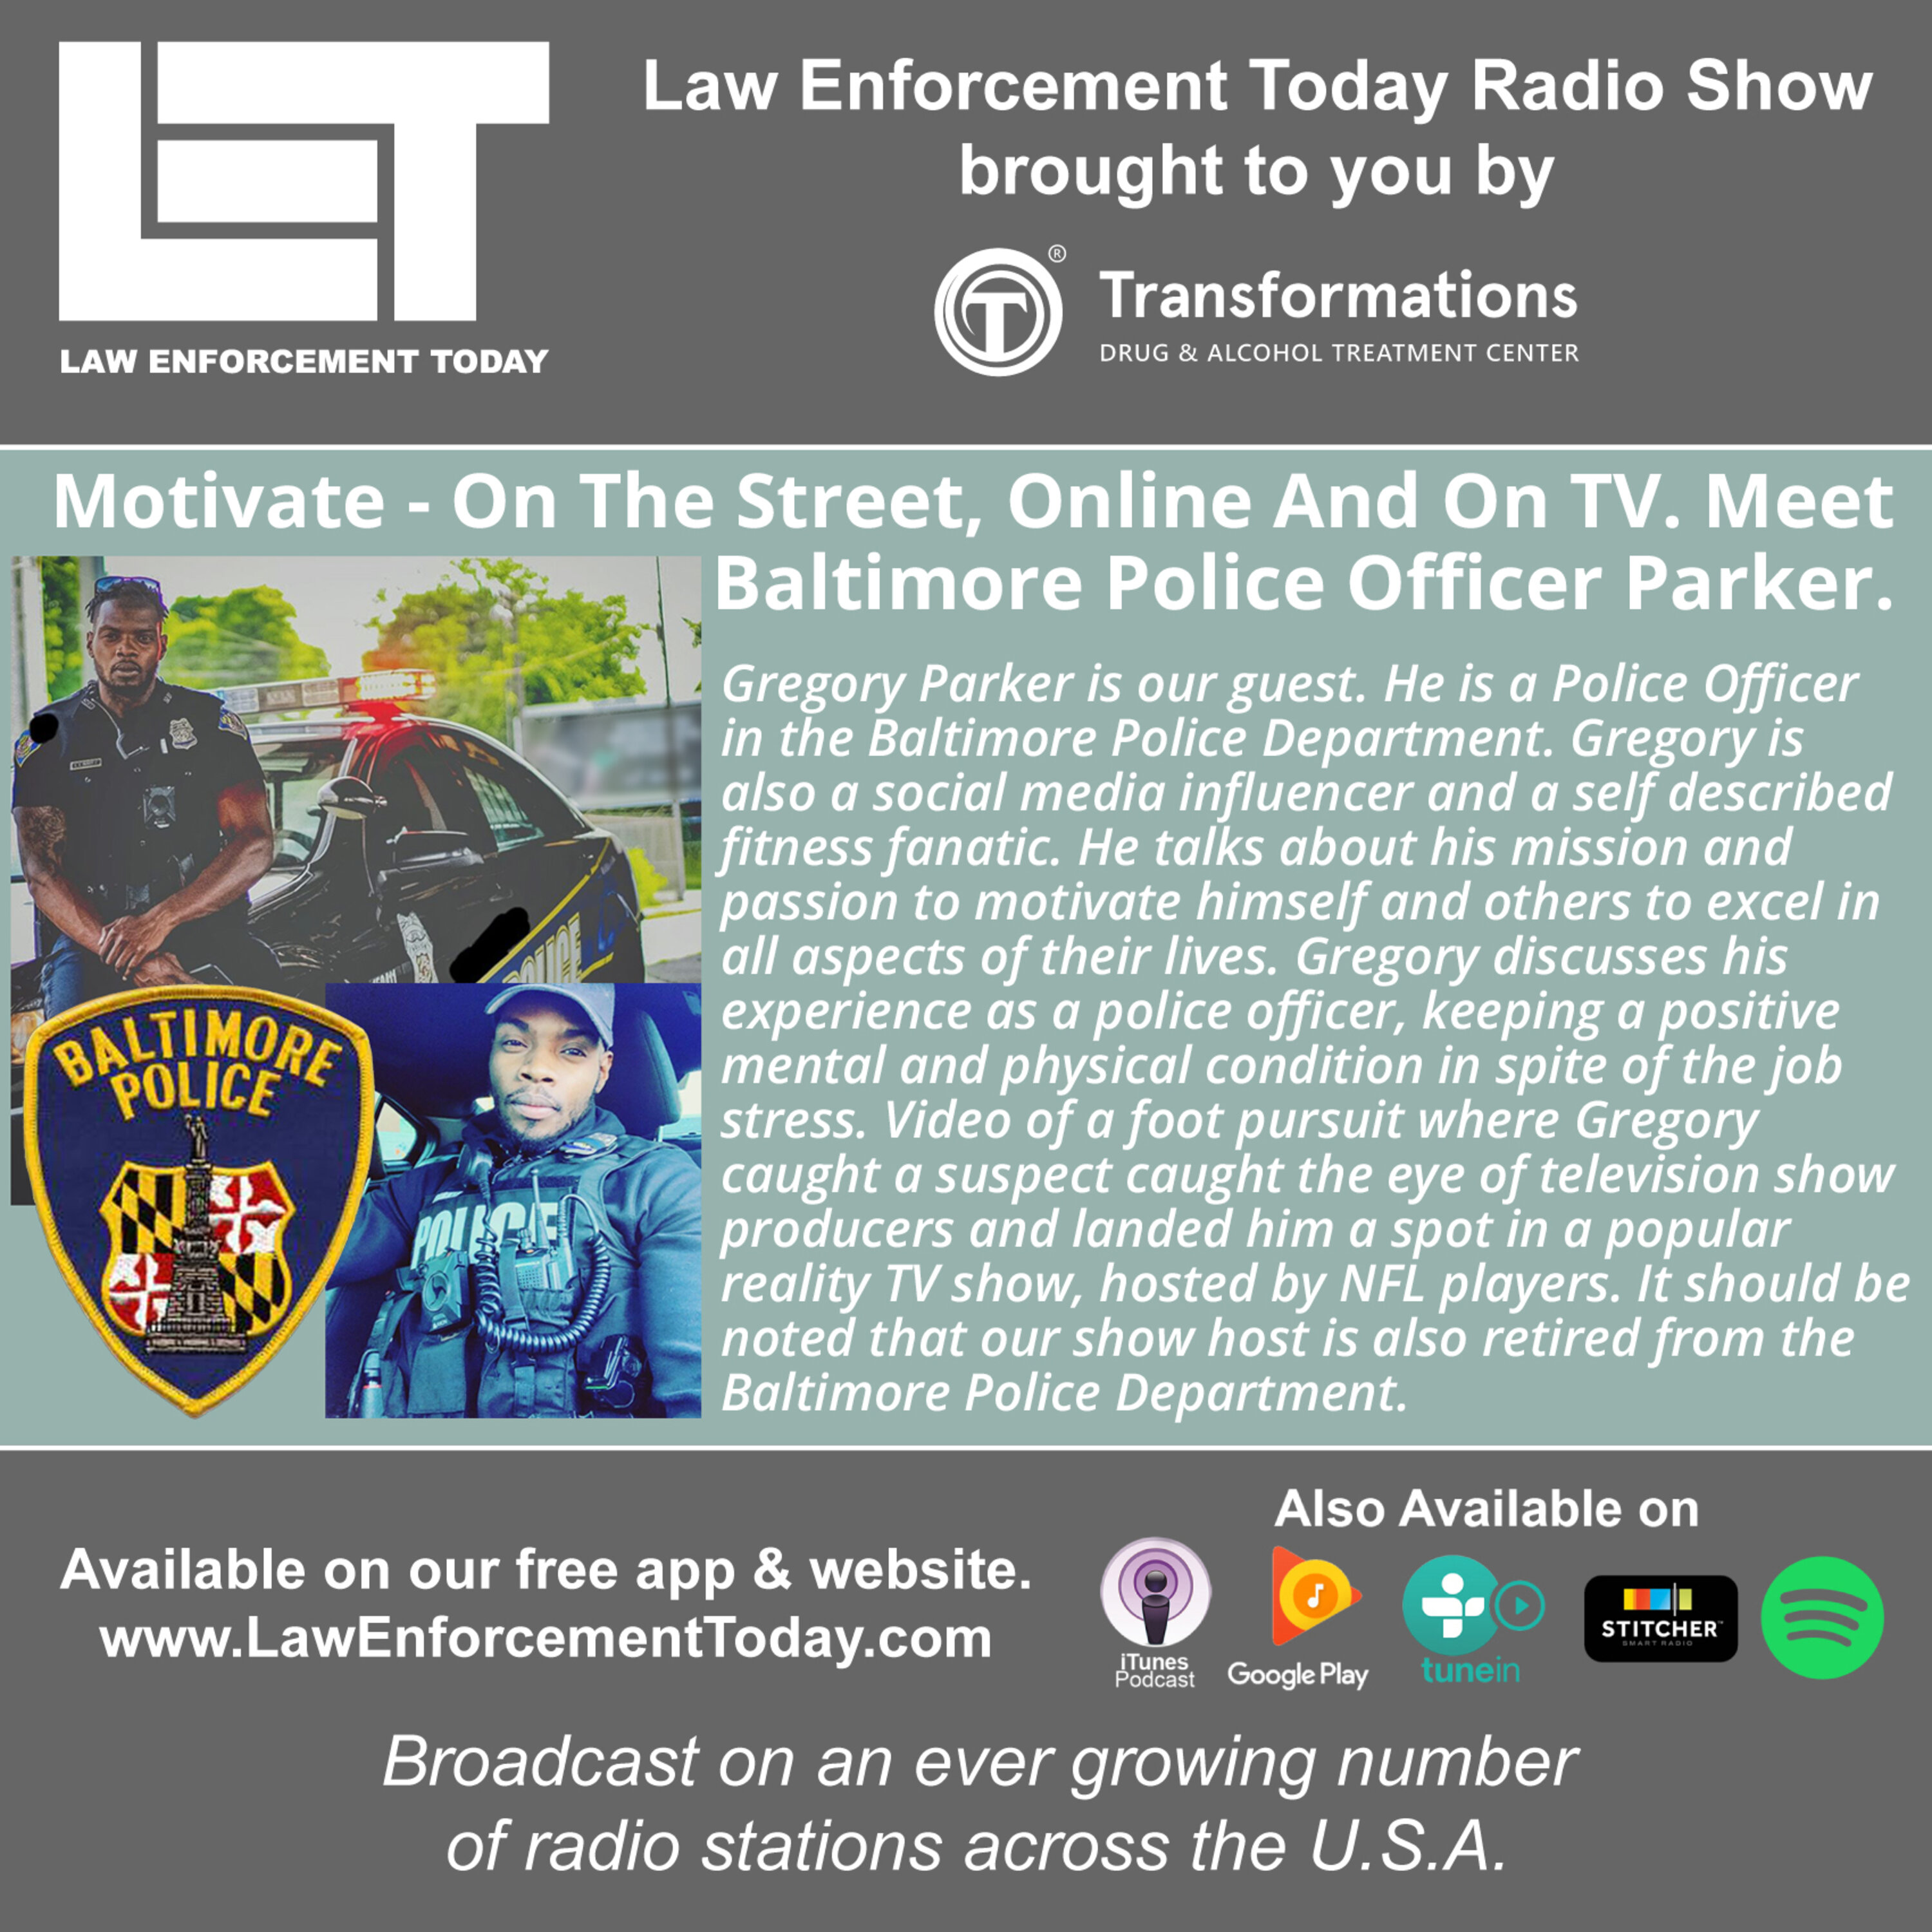 S4E49: Motivate - On The Street, Online And On TV. Meet Baltimore Police Officer Parker.